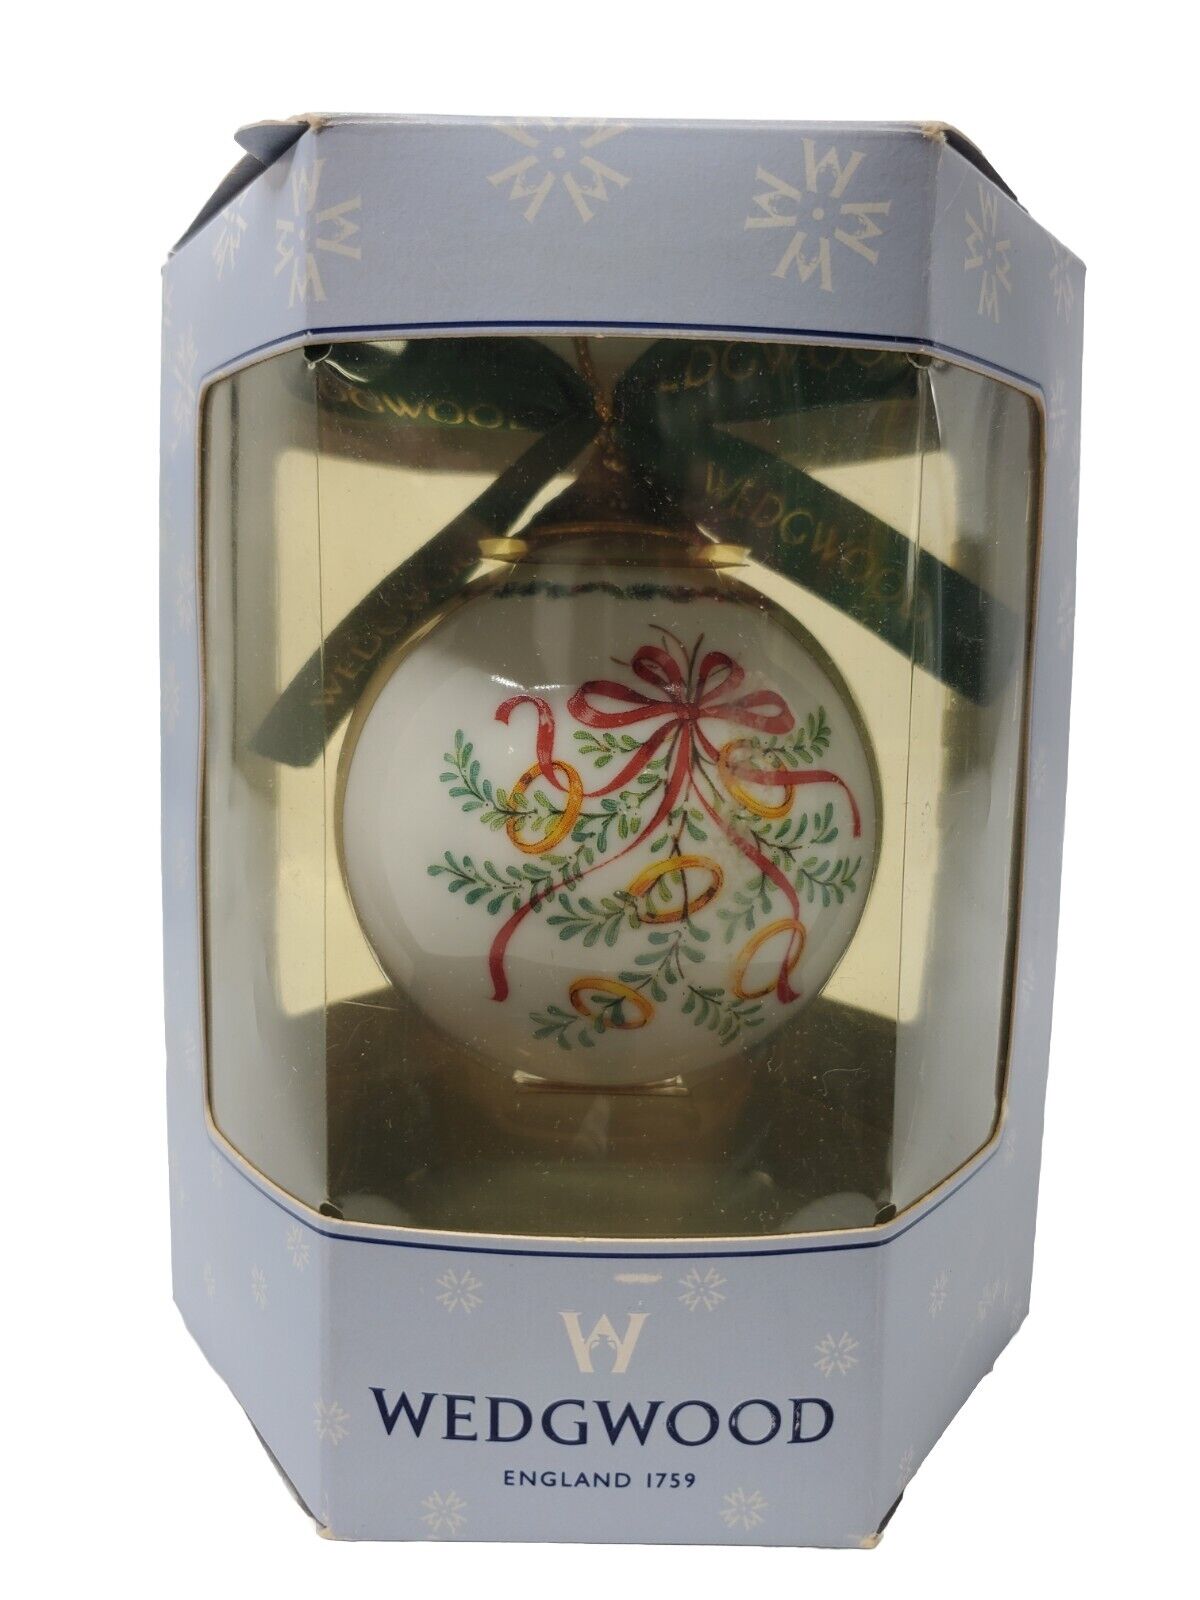 RARE Wedgwood 5th Day Of TWELVE DAYS OF CHRISTMAS BALL ORNAMENT FIVE GOLDEN RING